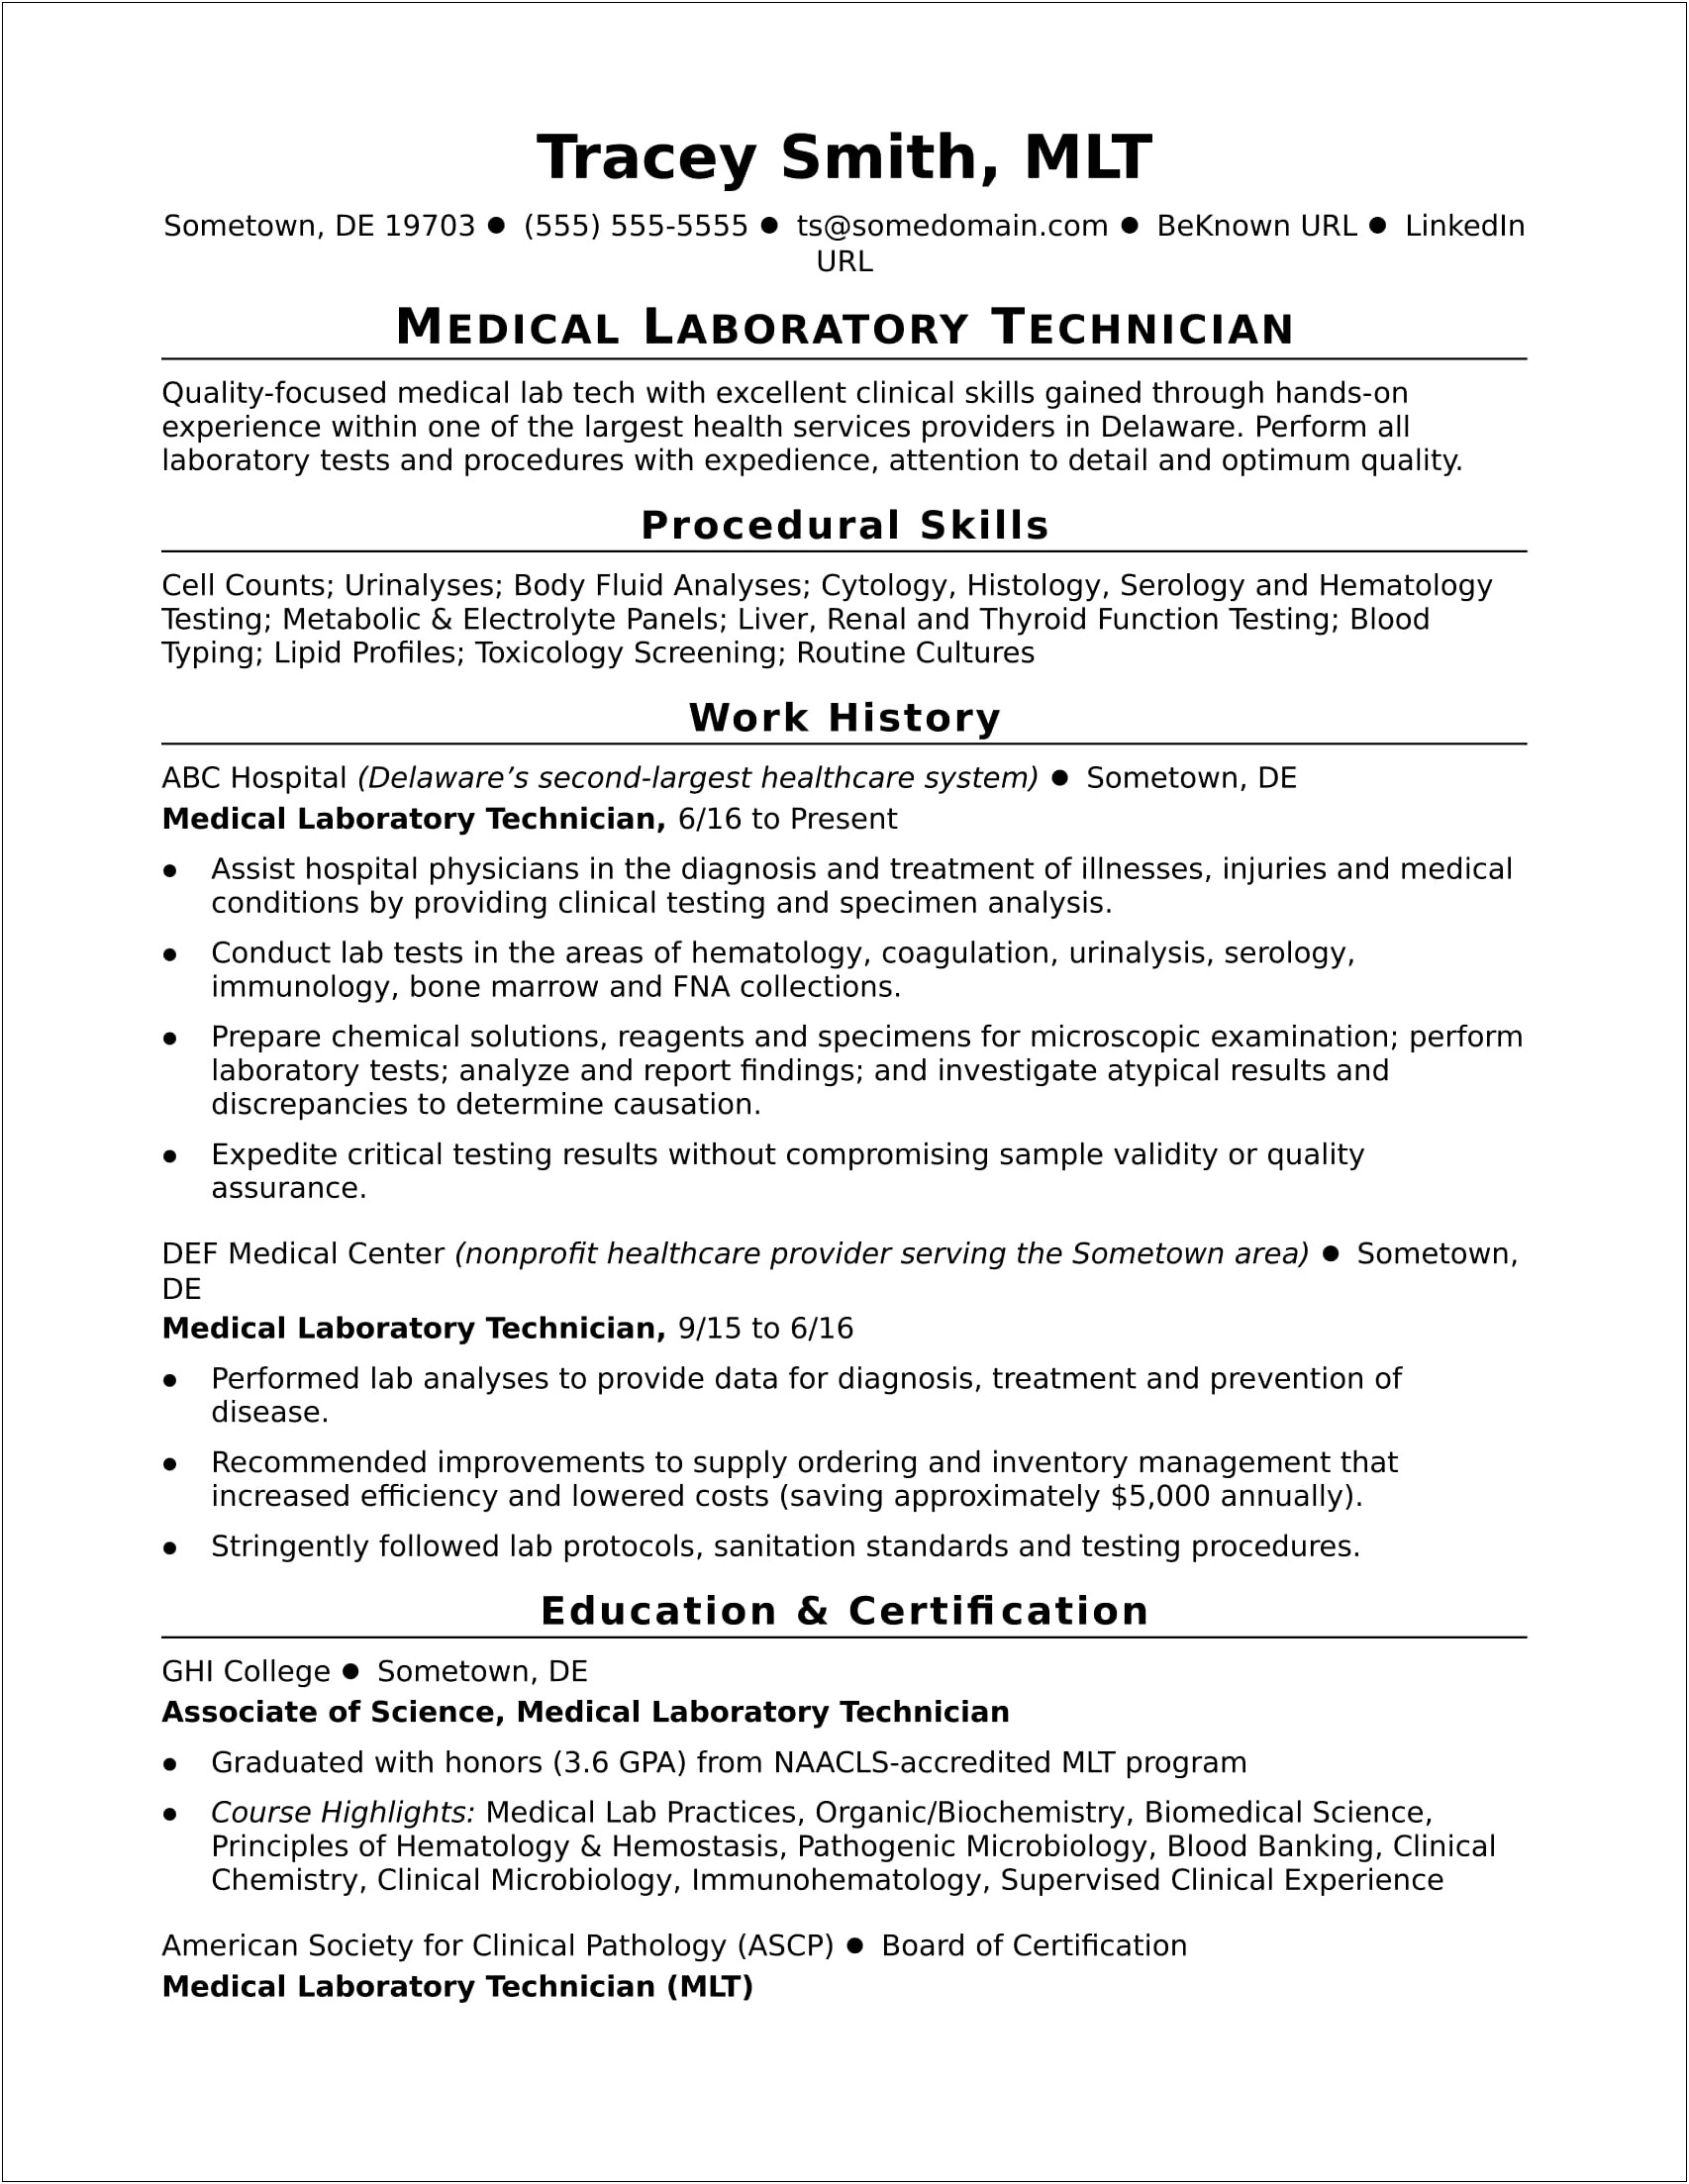 Resume Work Experience For Medical Technologist